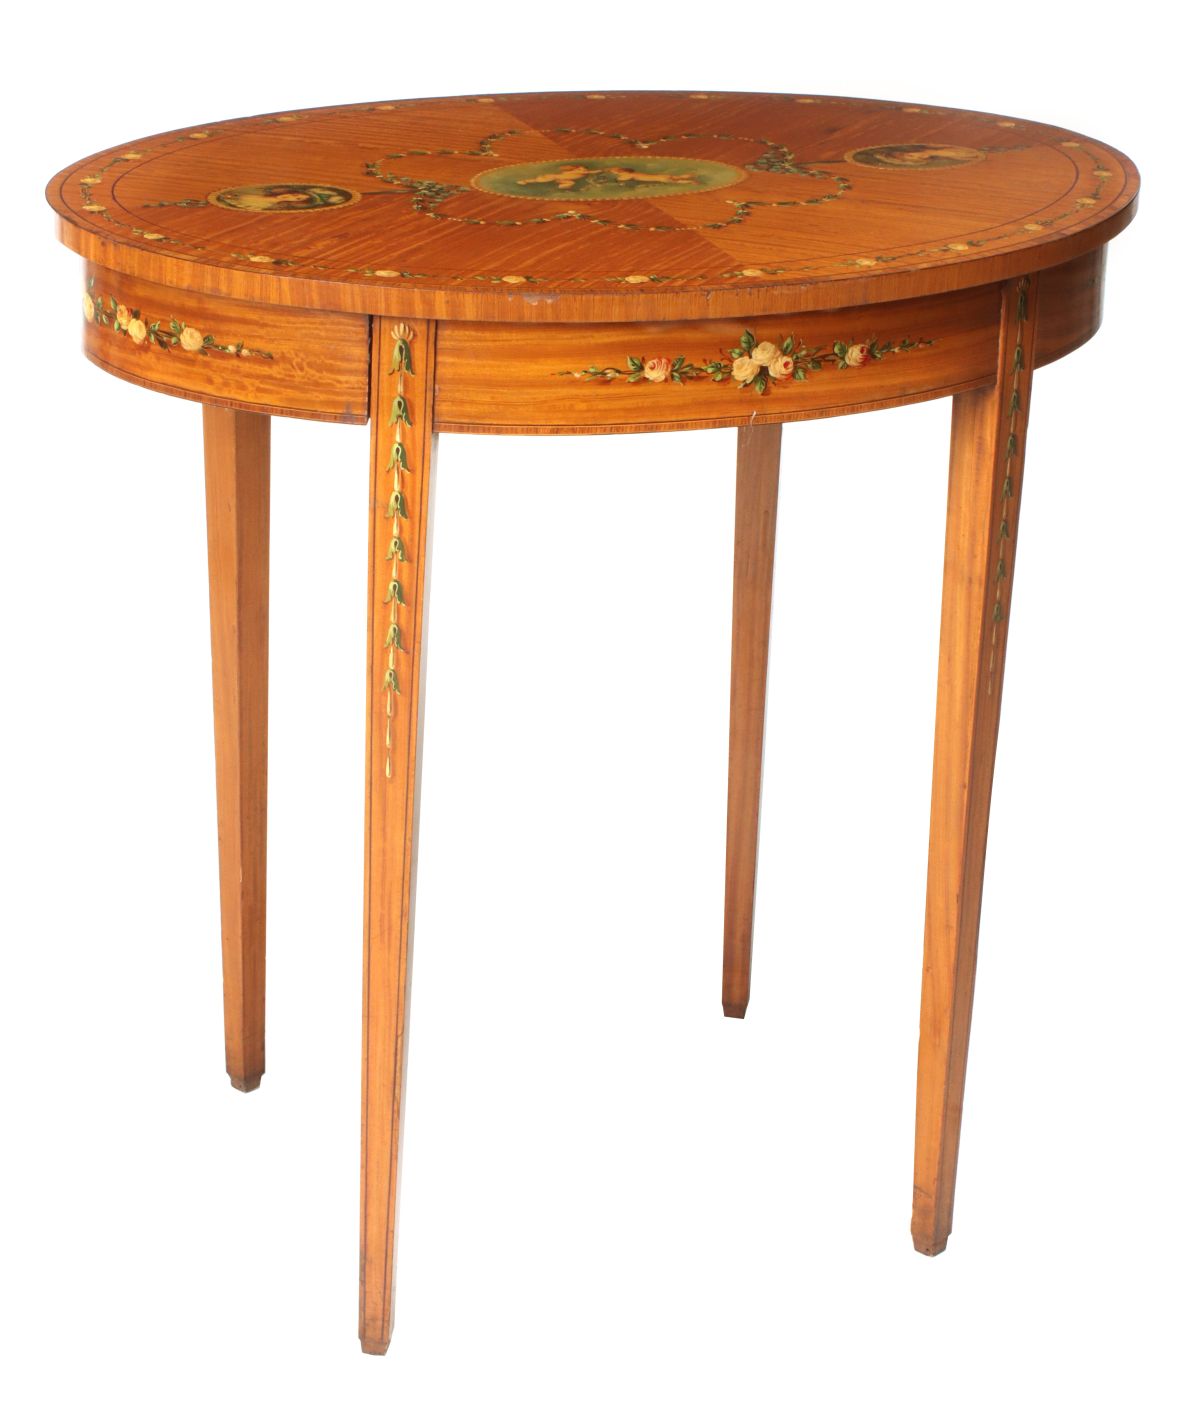 A HIGHLY FIGURED SATINWOOD TABLE WITH PAINT DECORATION